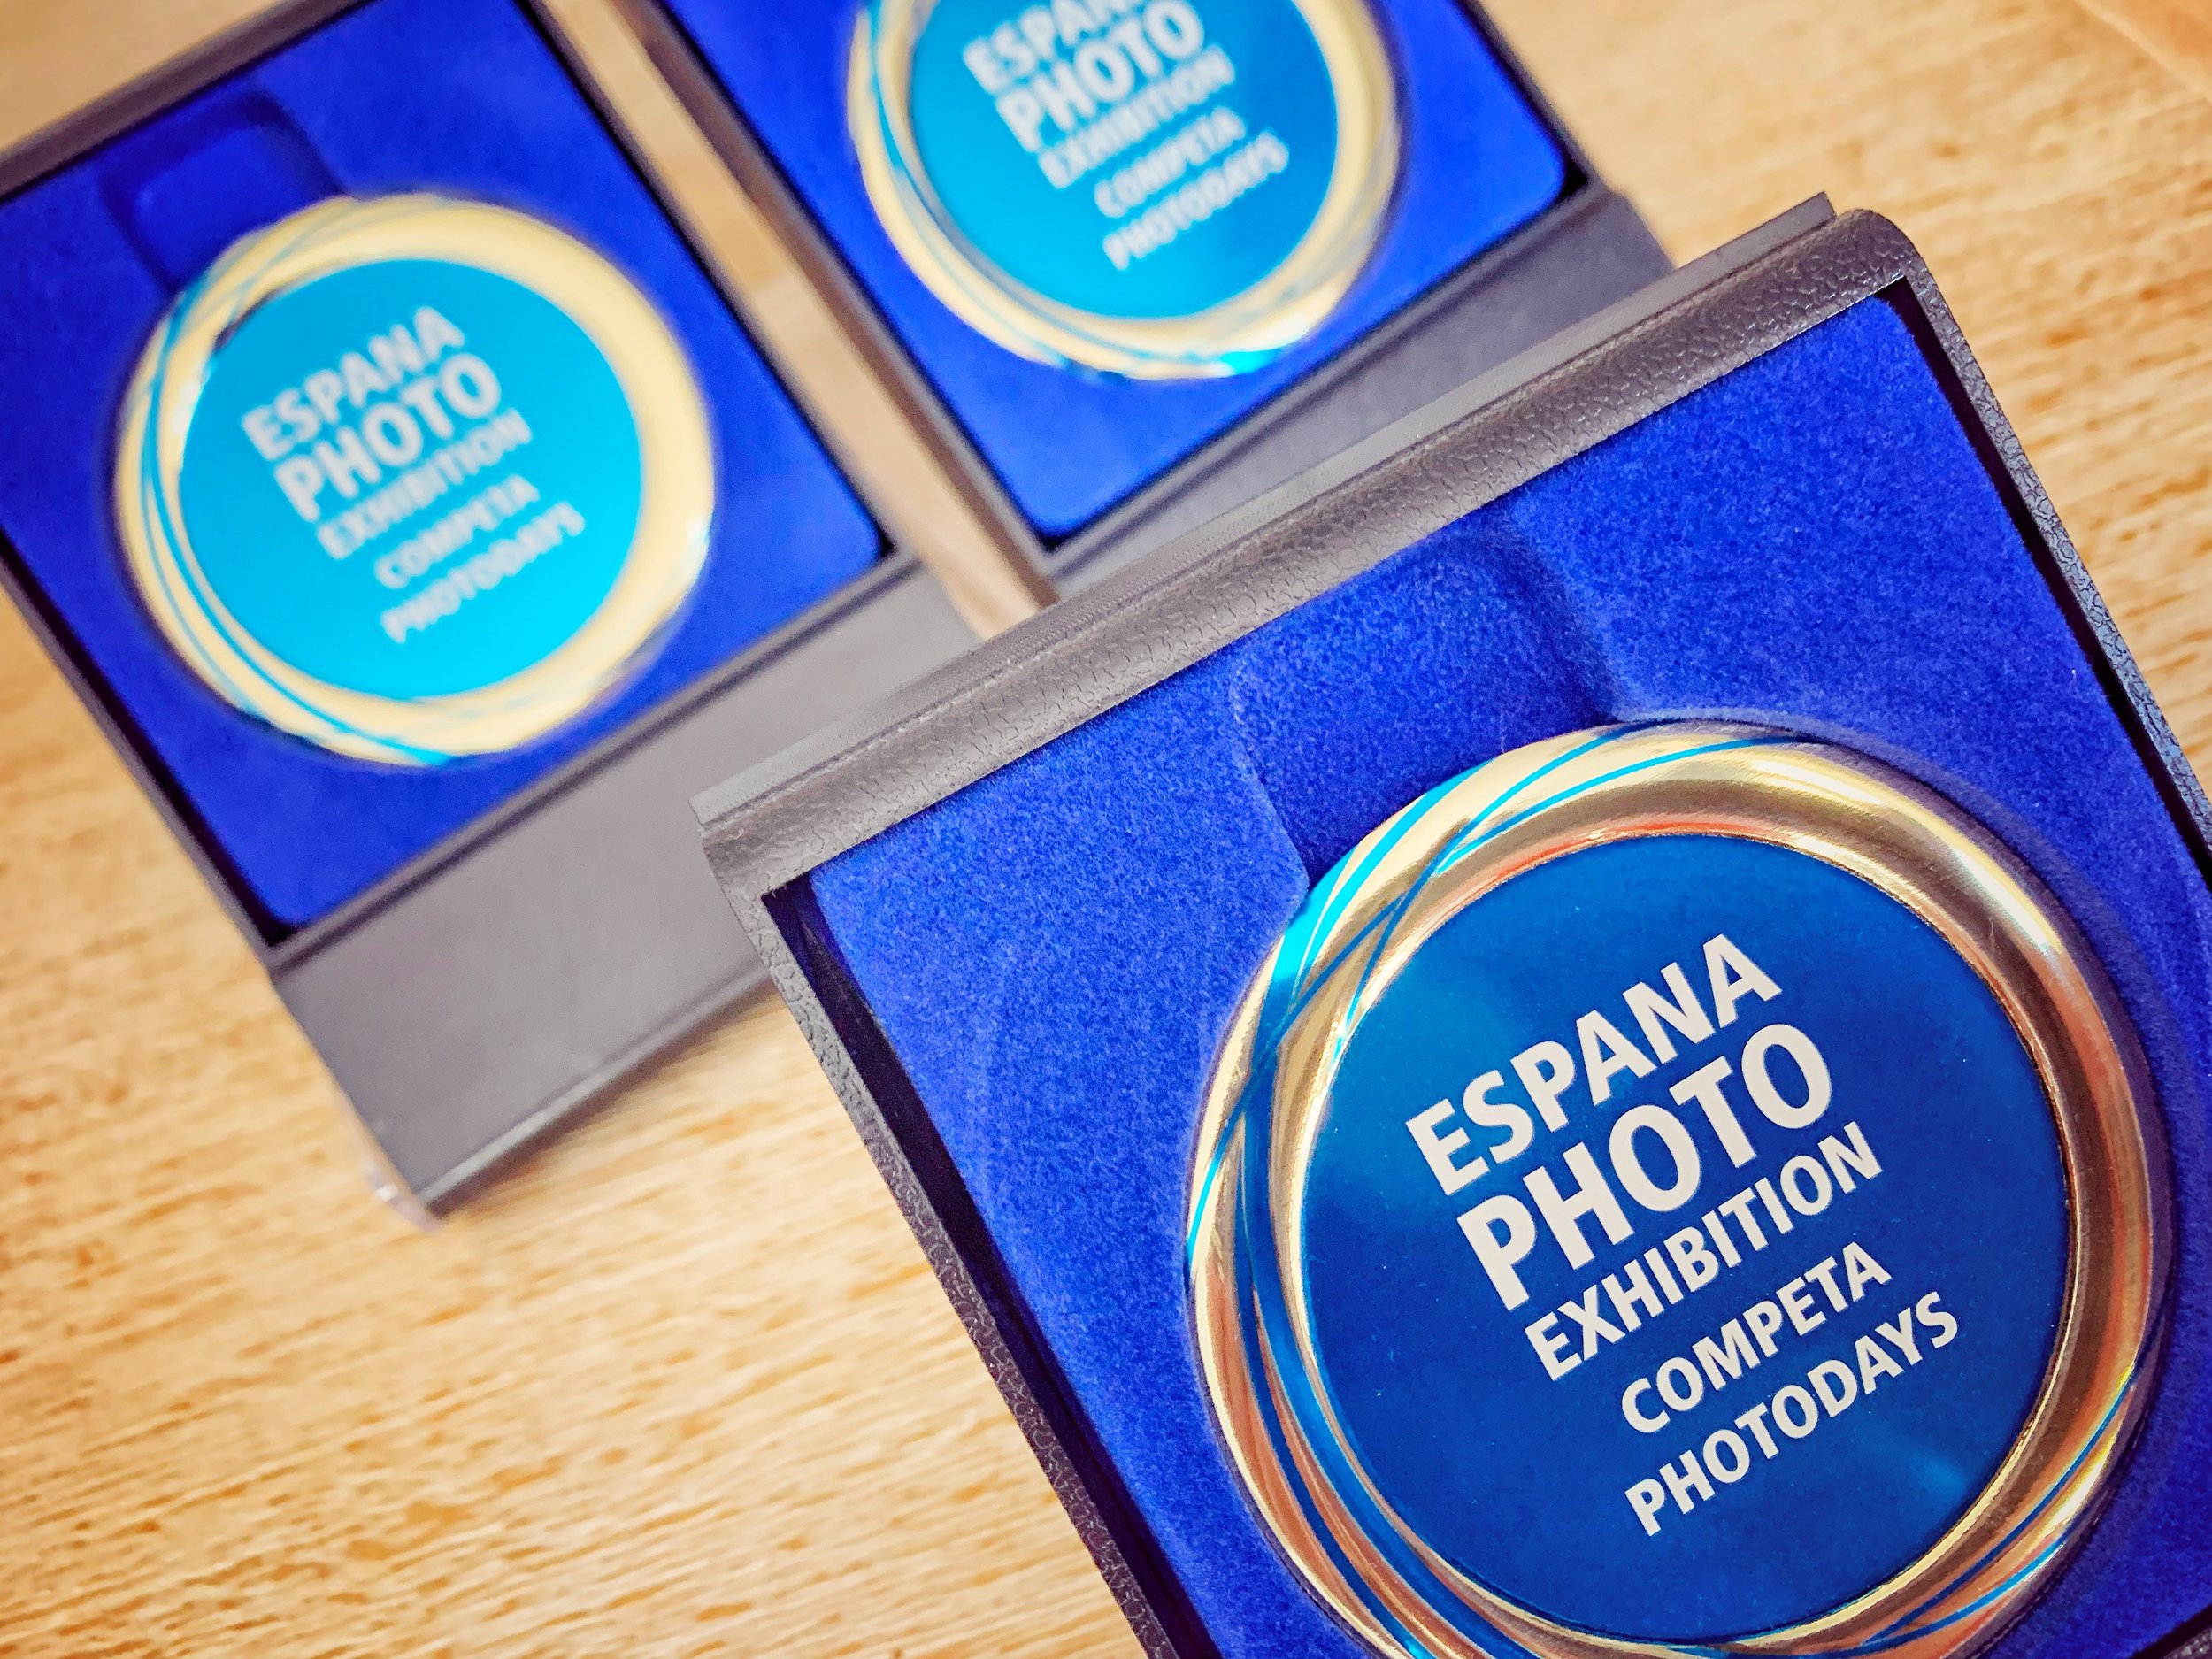 Epex Photo Award extended until October 20 due to high demand